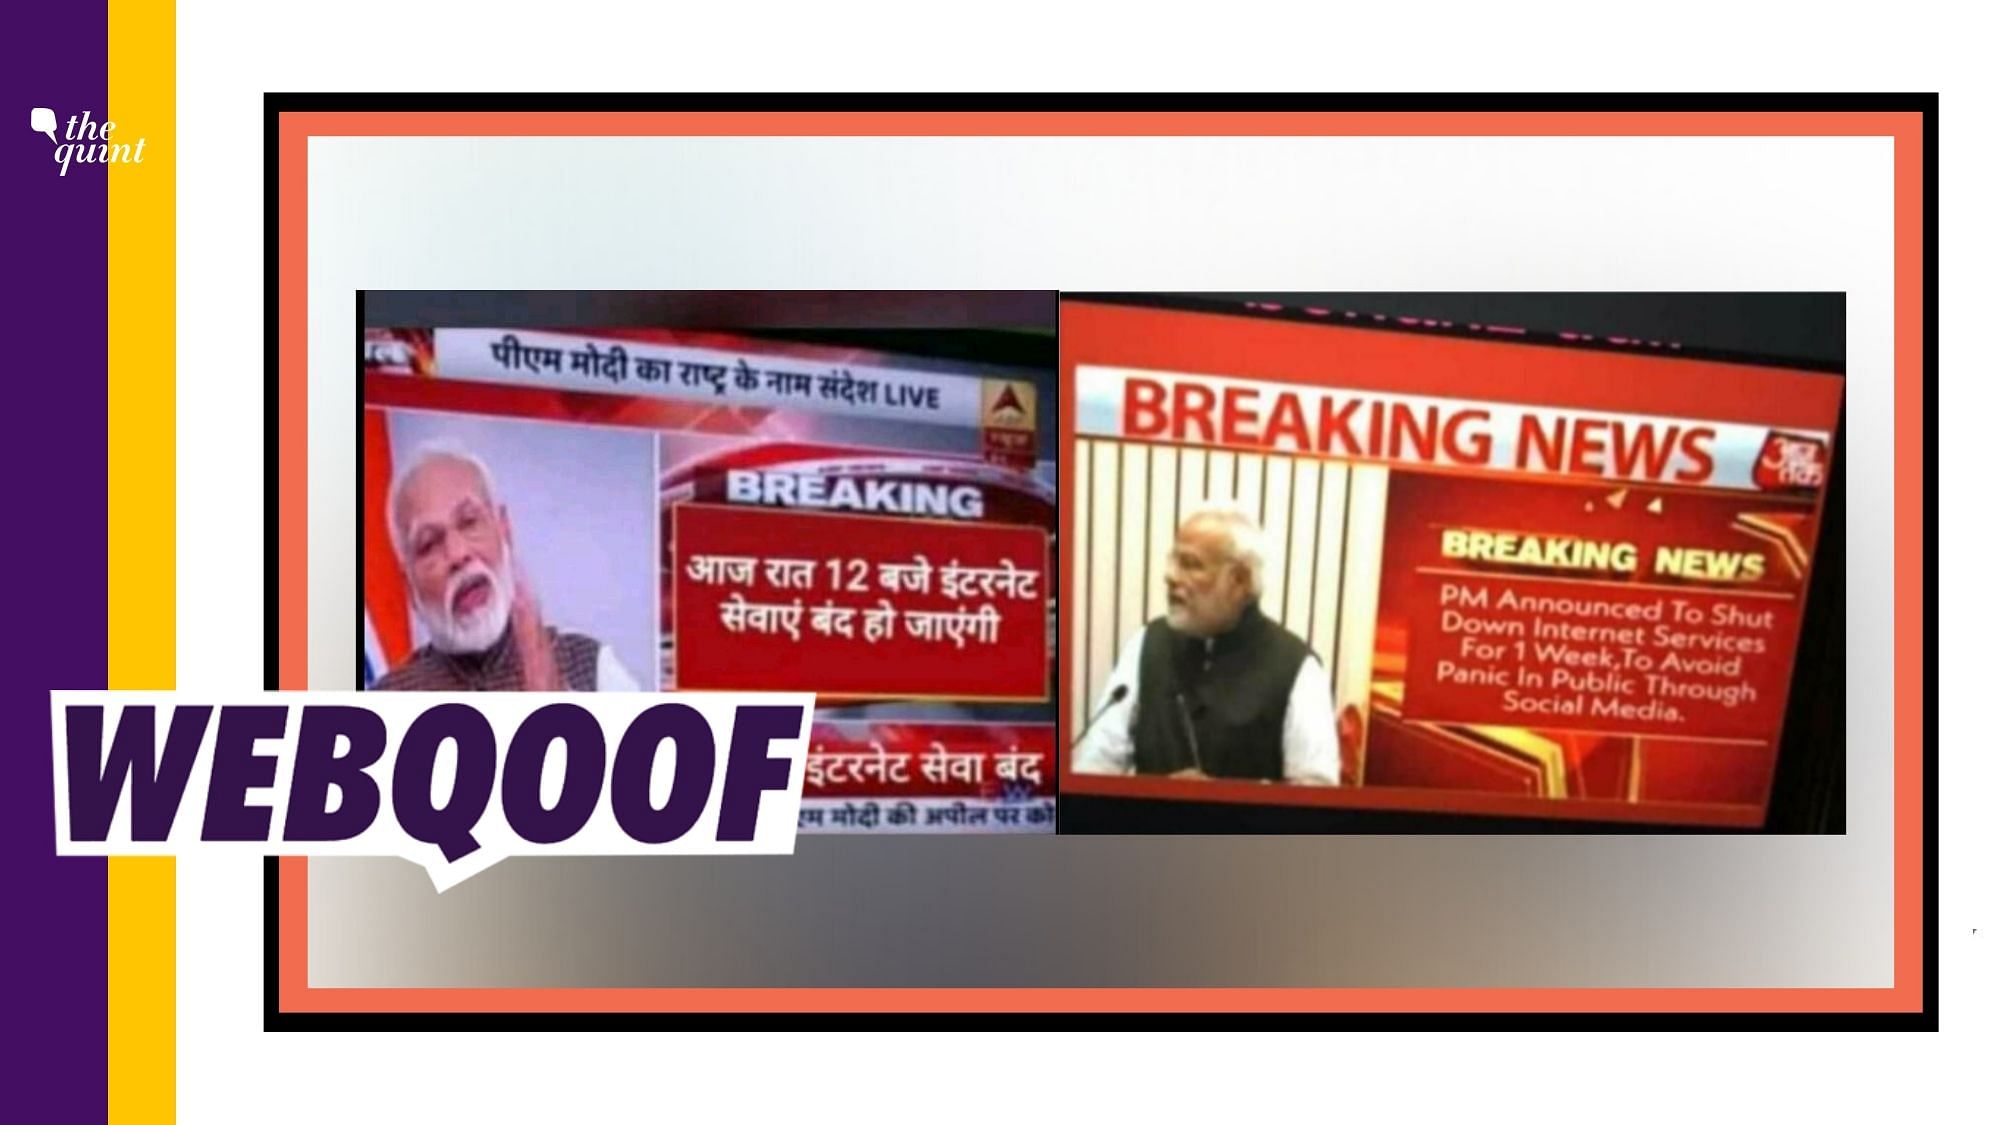 A set of images falsely claimed that PM Modi has ordered internet shutdown from 12 am.